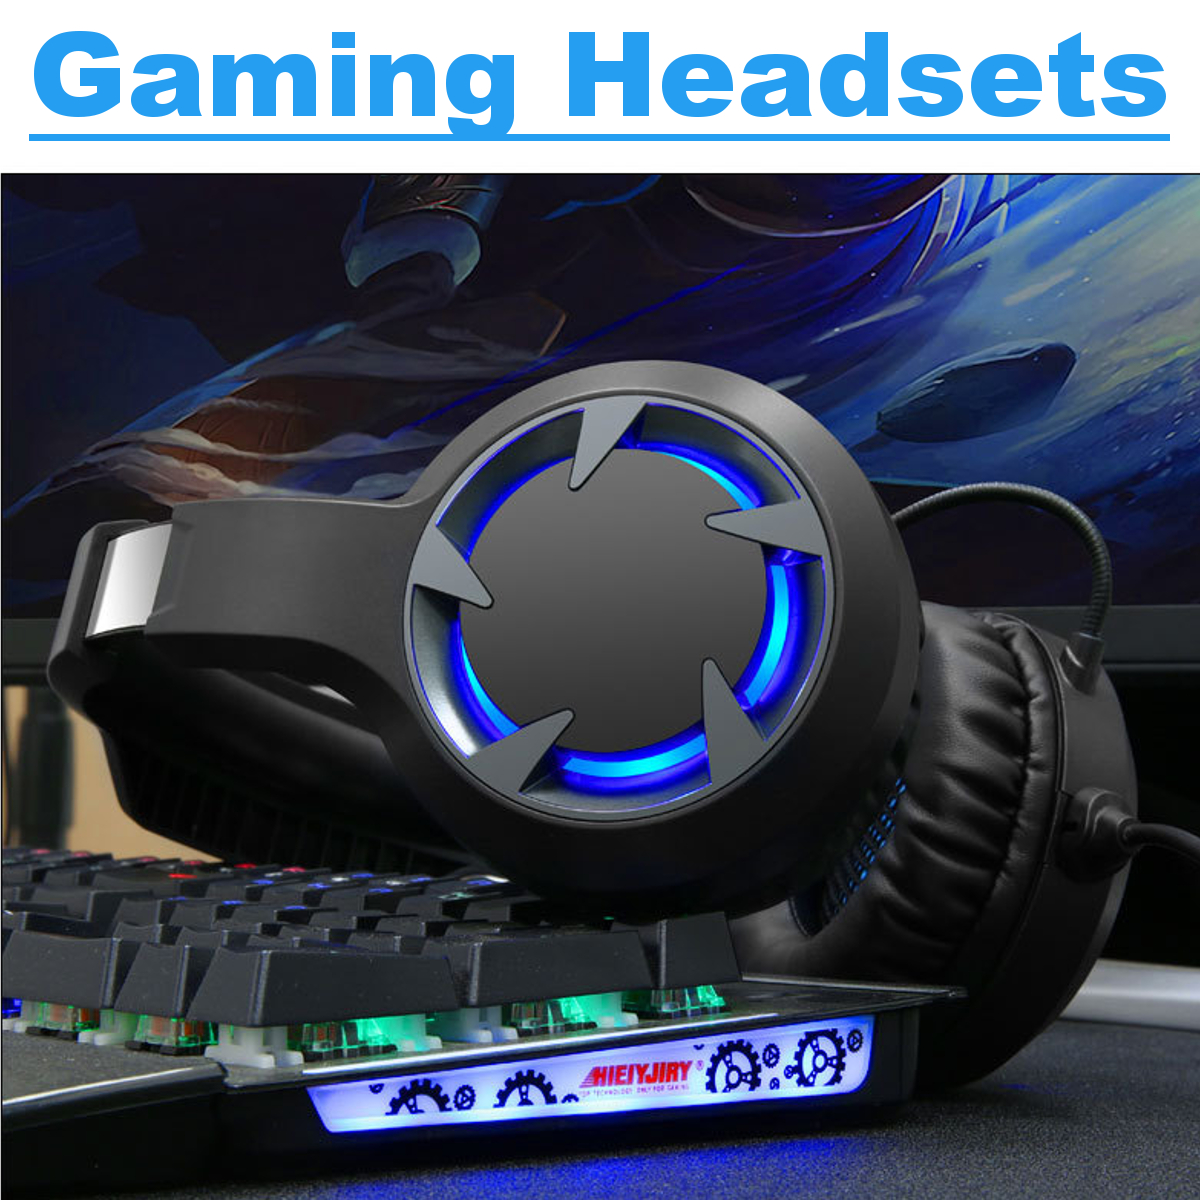 Bakeey-Wired-Headphones-Stereo-Bass-Surround-Gaming-Headset-for-PS4-New-for-Xbox-One-PC-with-Mic-1866137-8